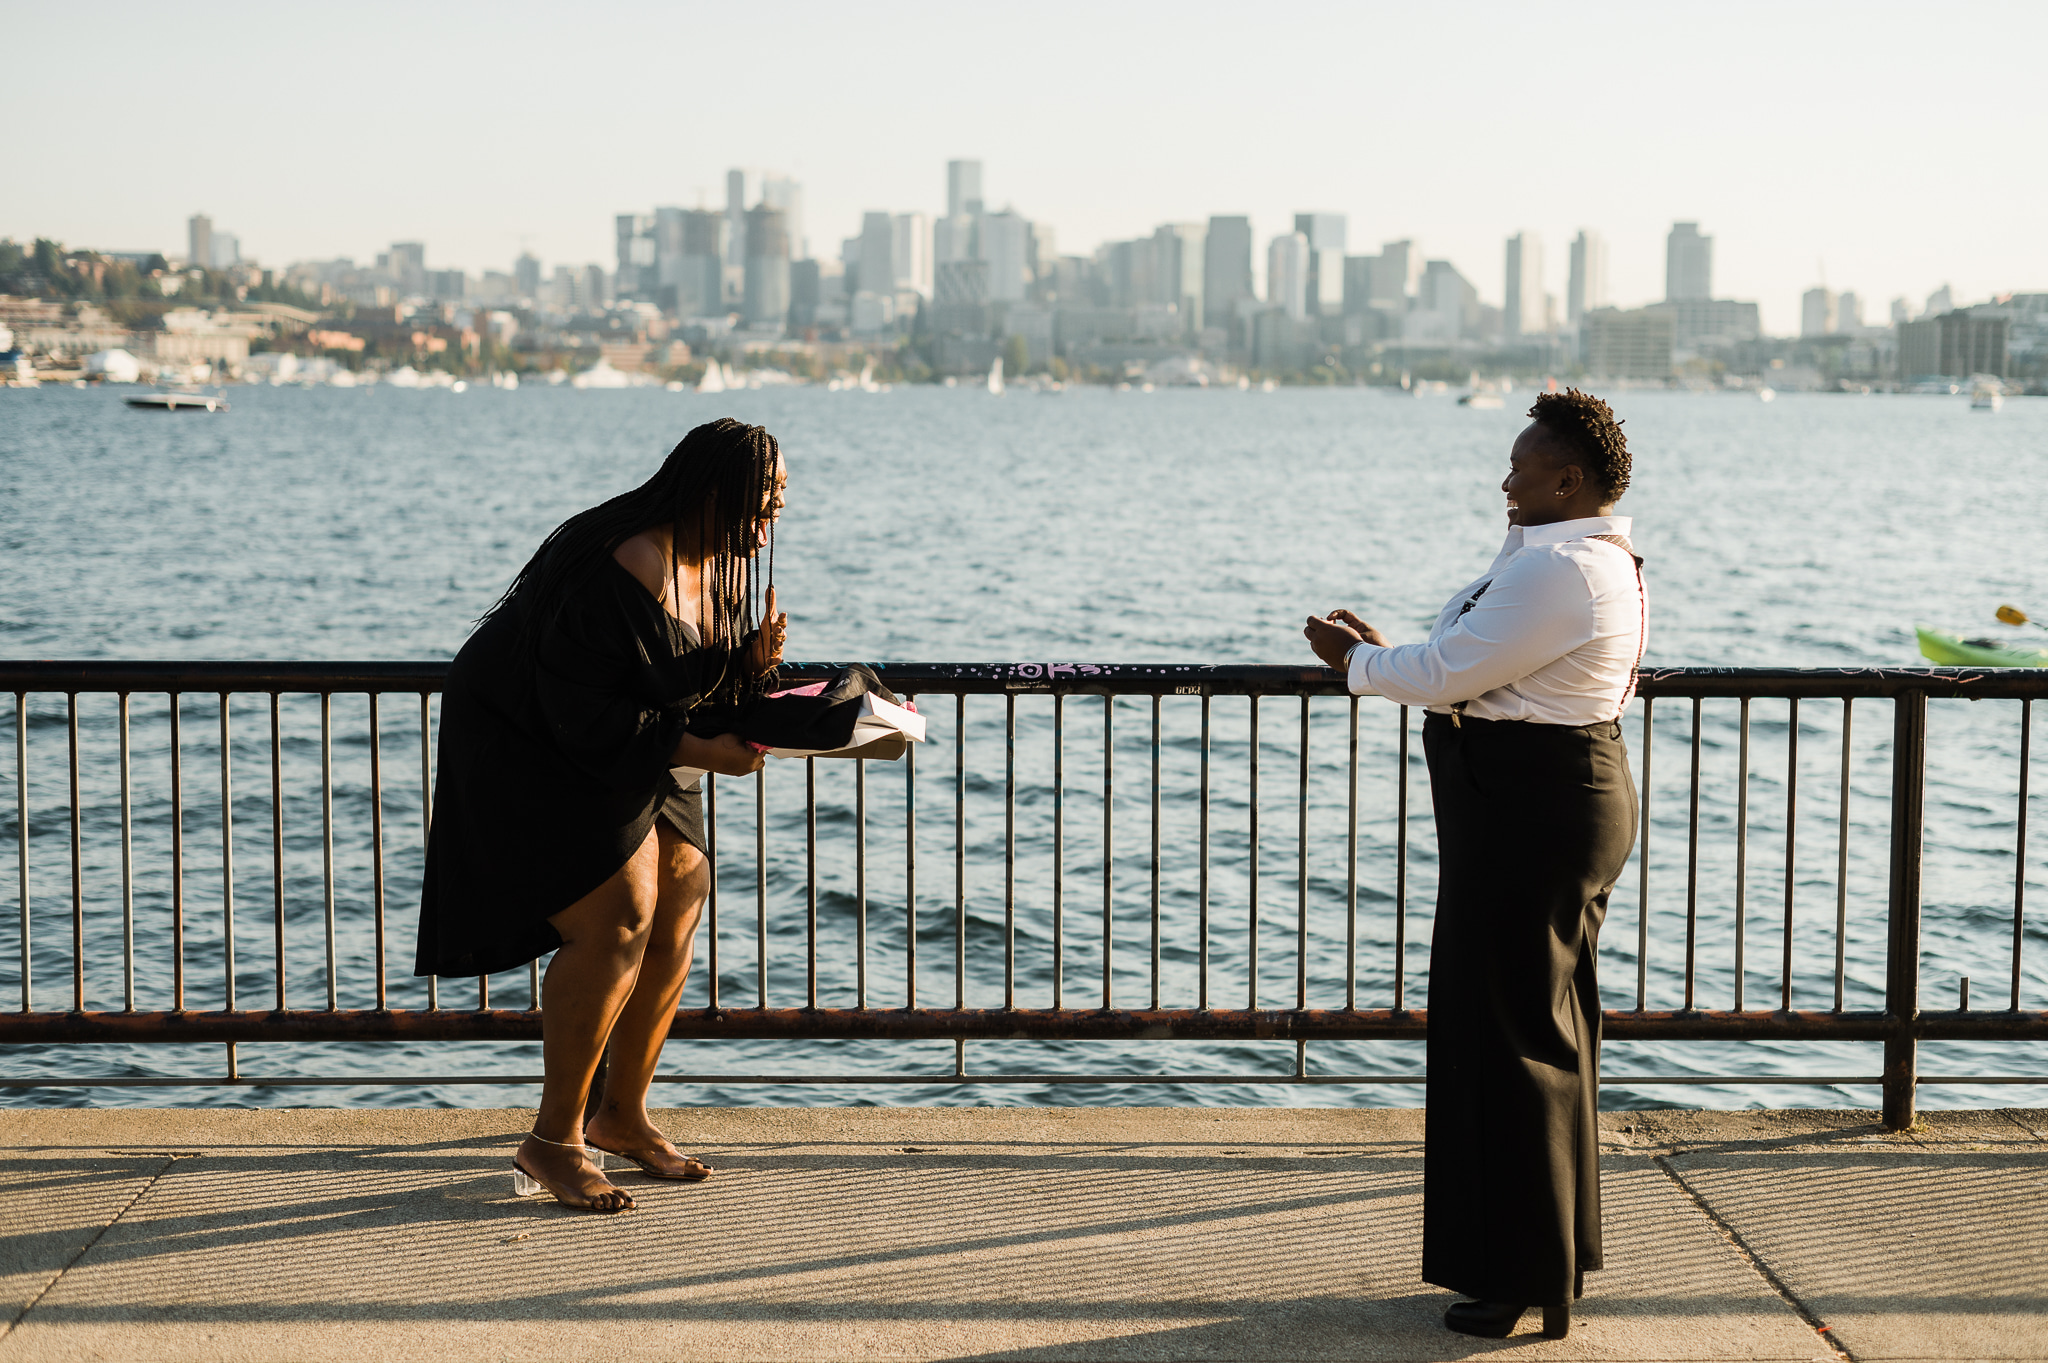 Gas Works Park Proposal Seattle, Seattle Proposal Photographer, Captured by Candace Photography, LGBTQ Couples Photography Seattle